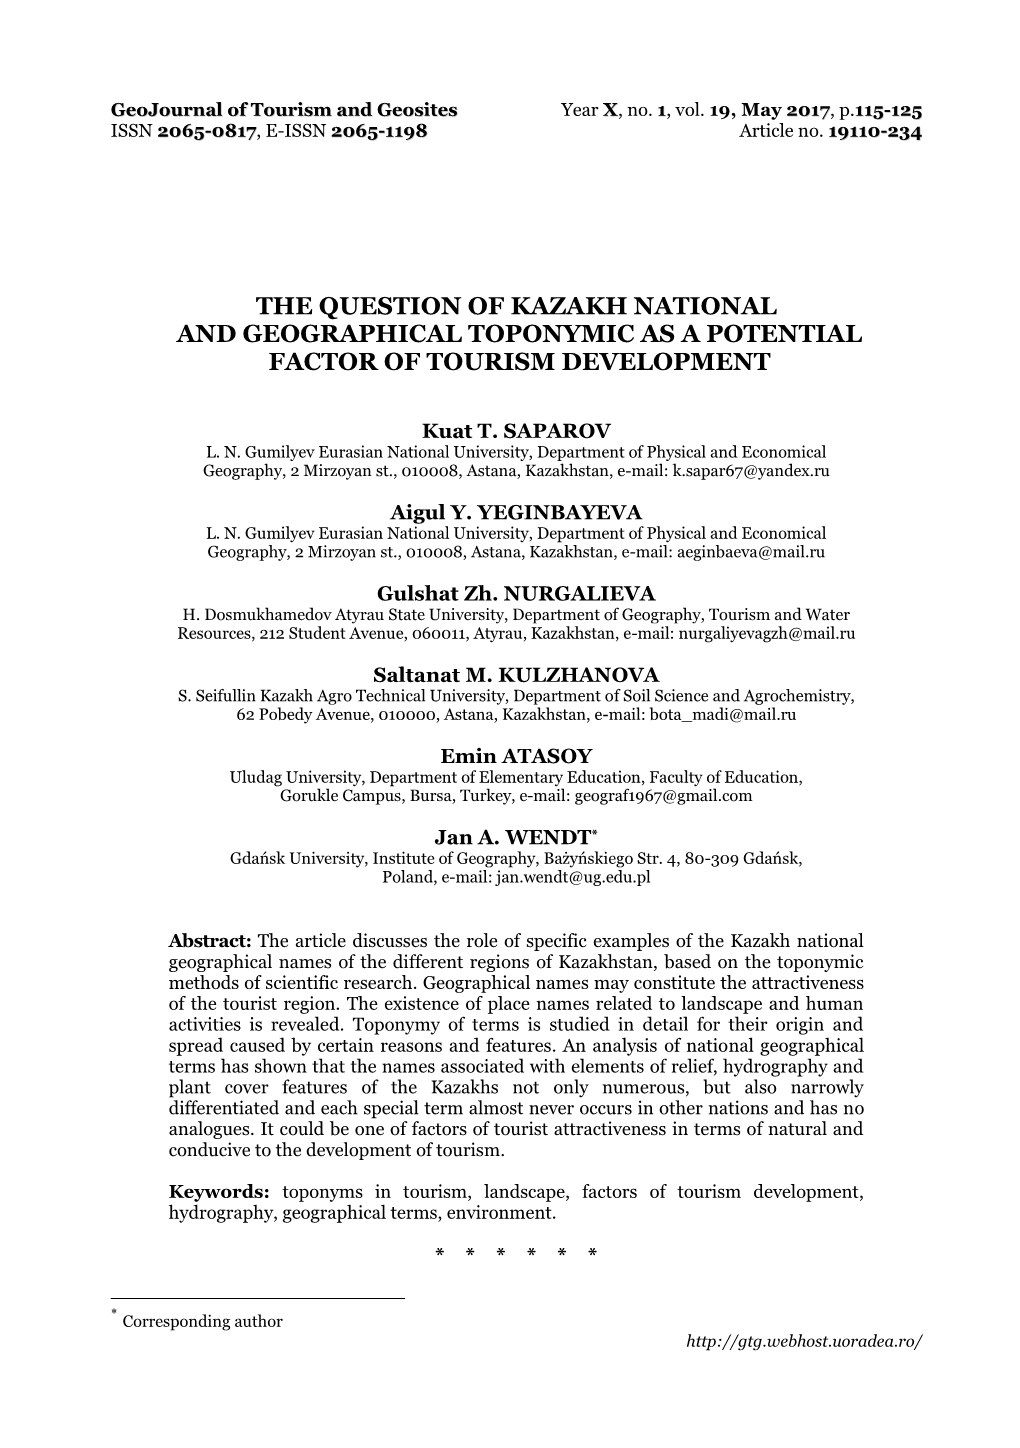 The Question of Kazakh National and Geographical Toponymic As a Potential Factor of Tourism Development